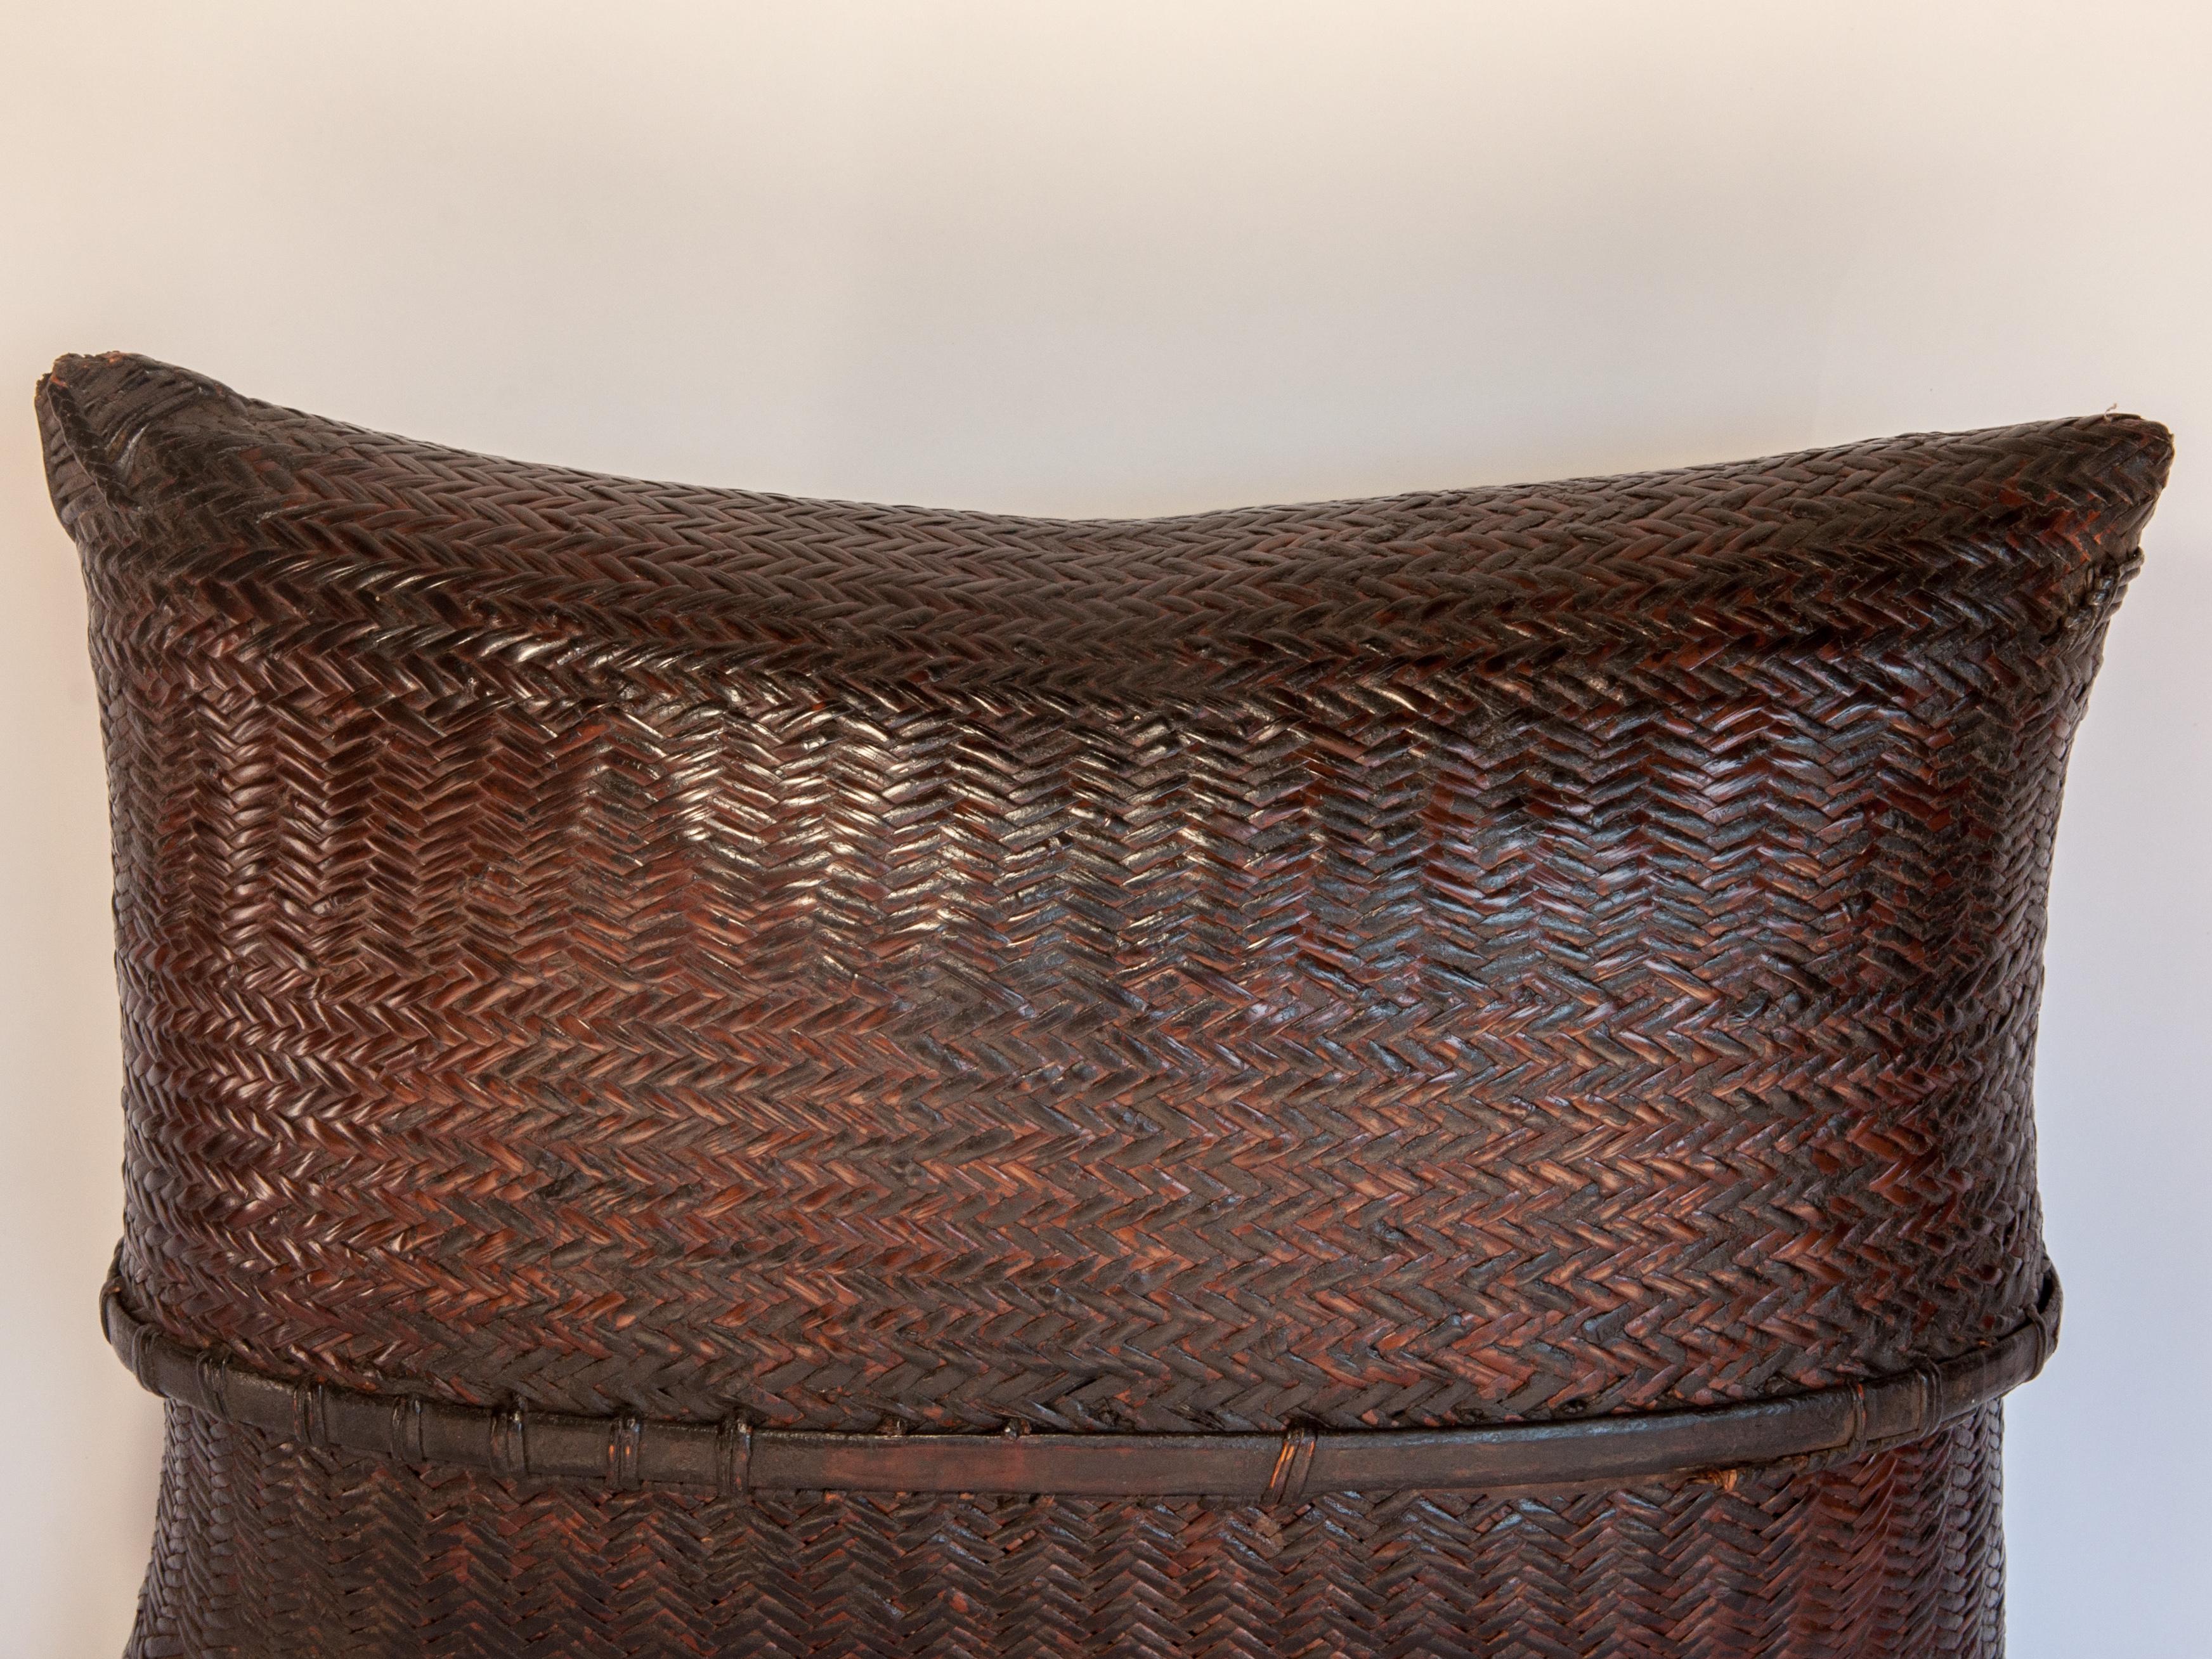 Tribal Large Vintage Double Weave Pouch Basket, Nepal, Mid-20th Century